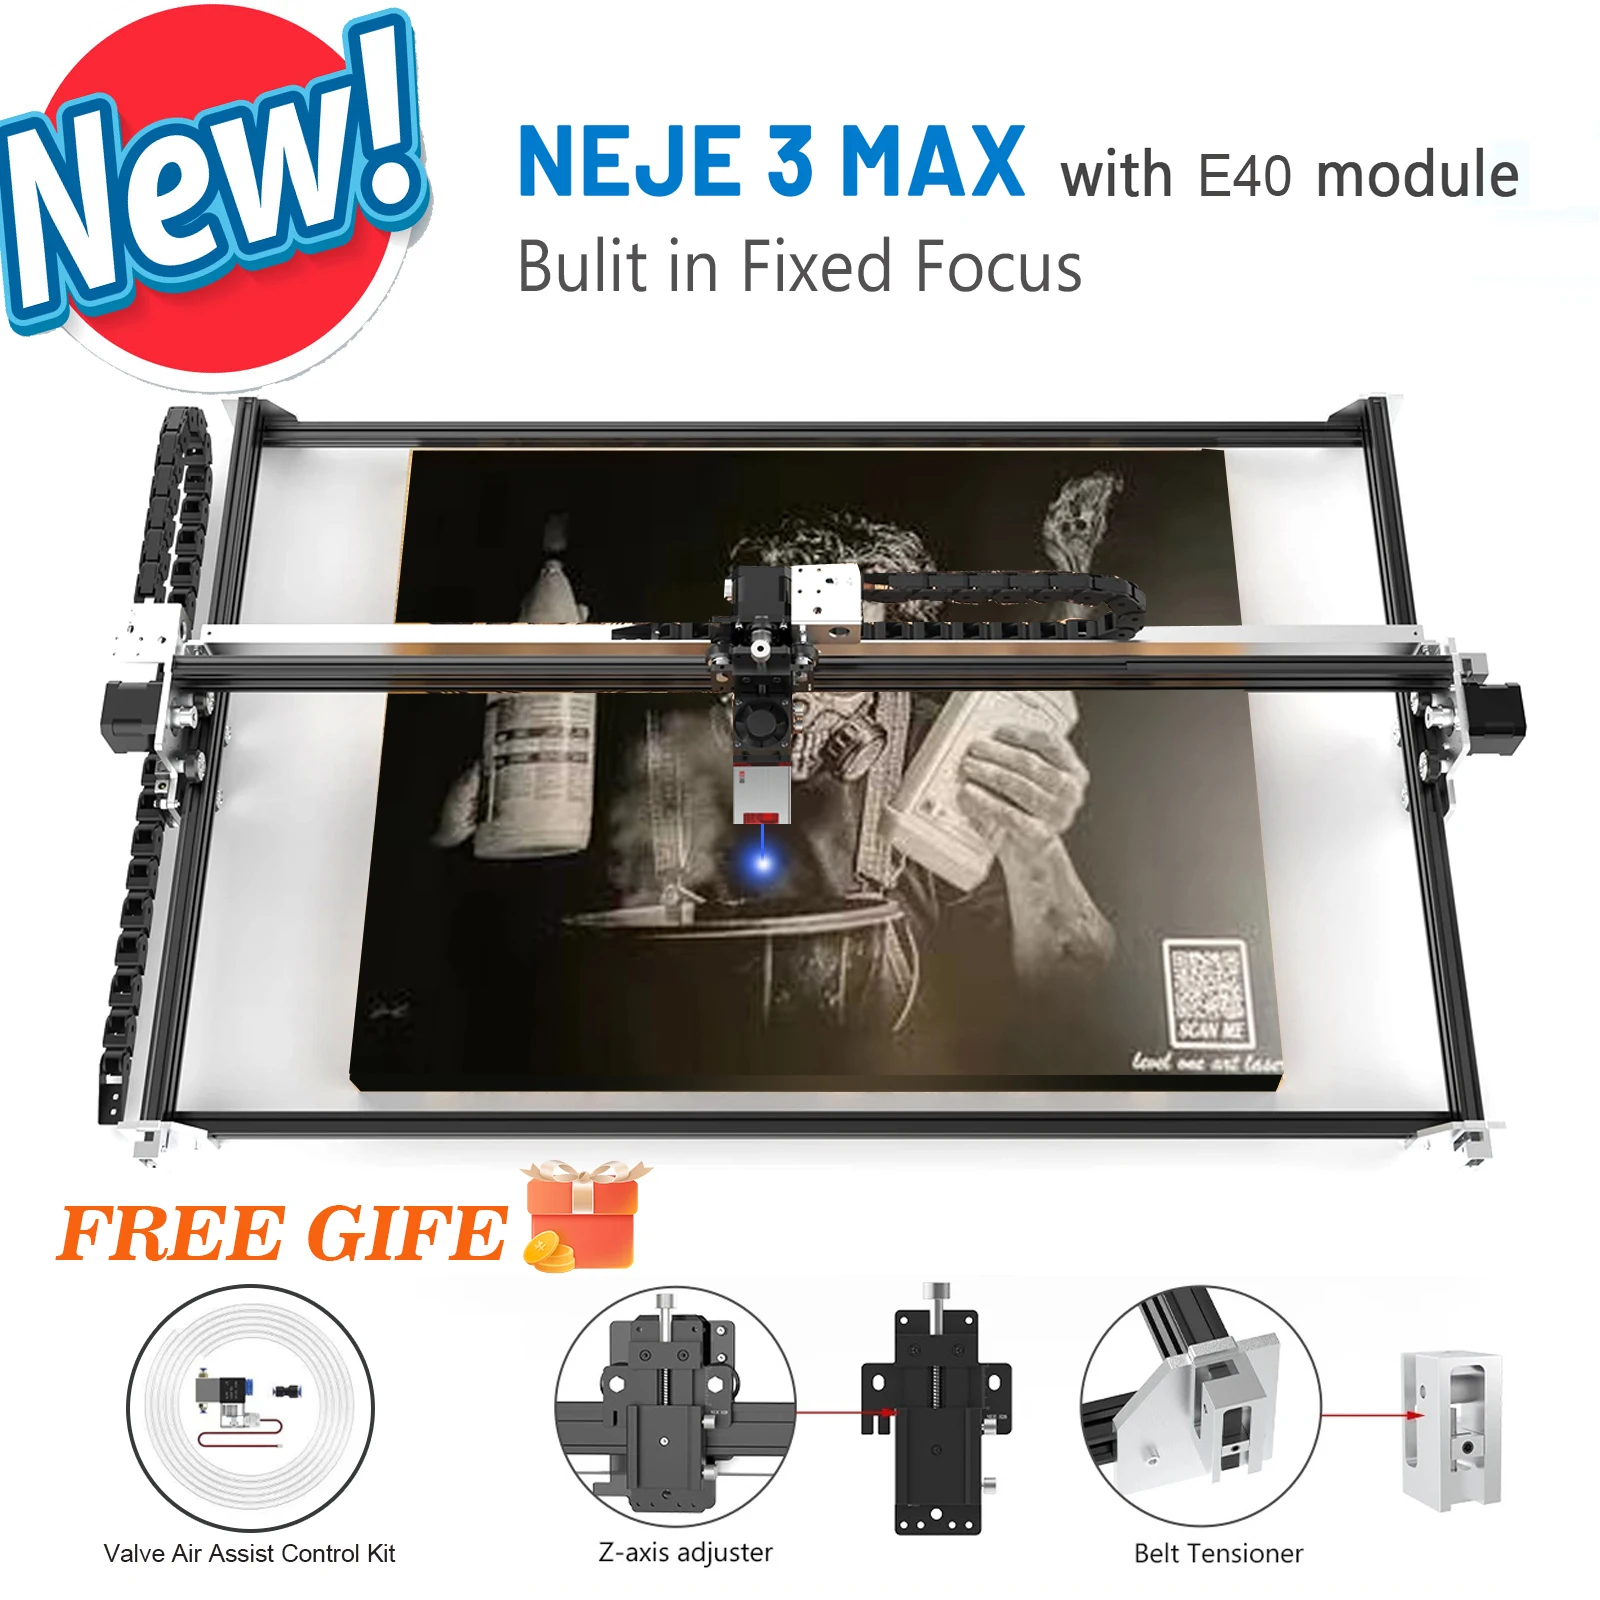 NEJE 3 Max E40 CNC Laser Engraver, Powerful DIY Laser Engraving Cutting Machine for Wood and Metal, Portable 3D Printer Cutter